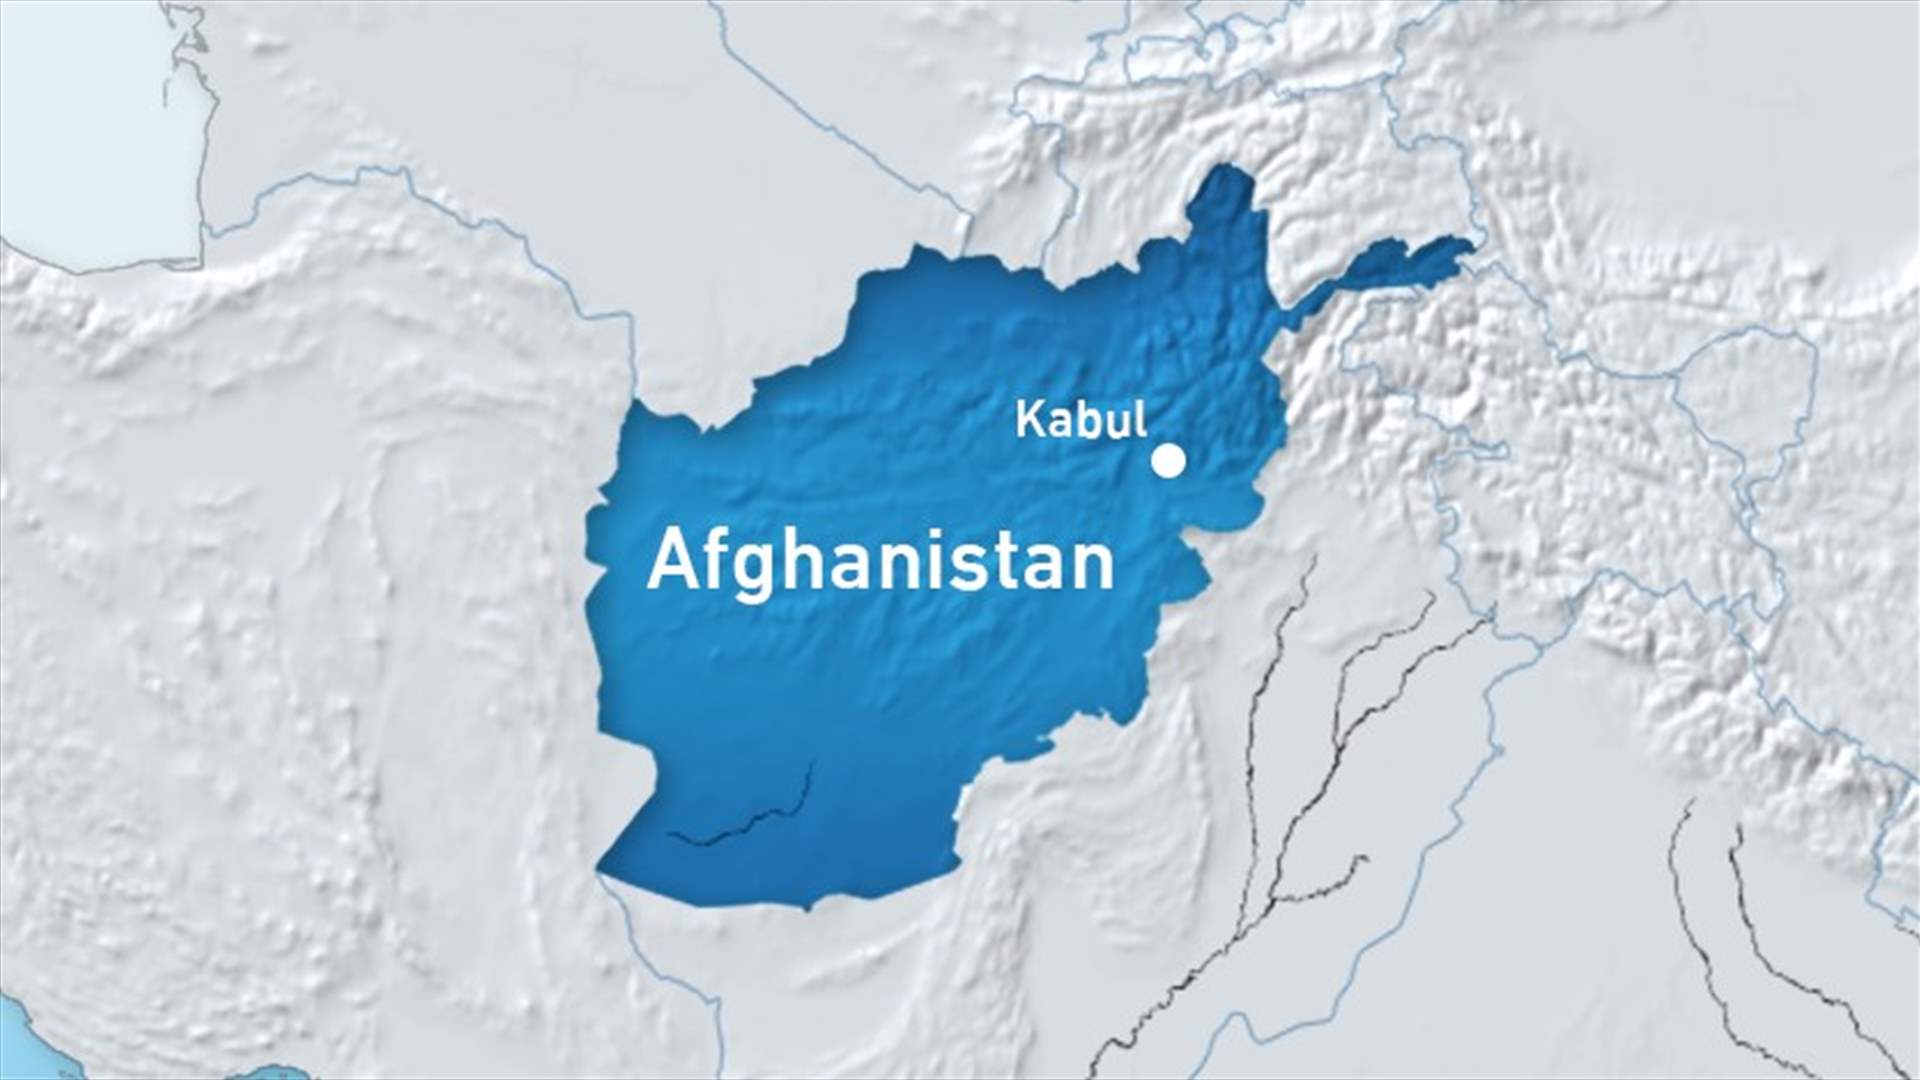 Roadside bomb kills a US soldier in Afghanistan - coalition